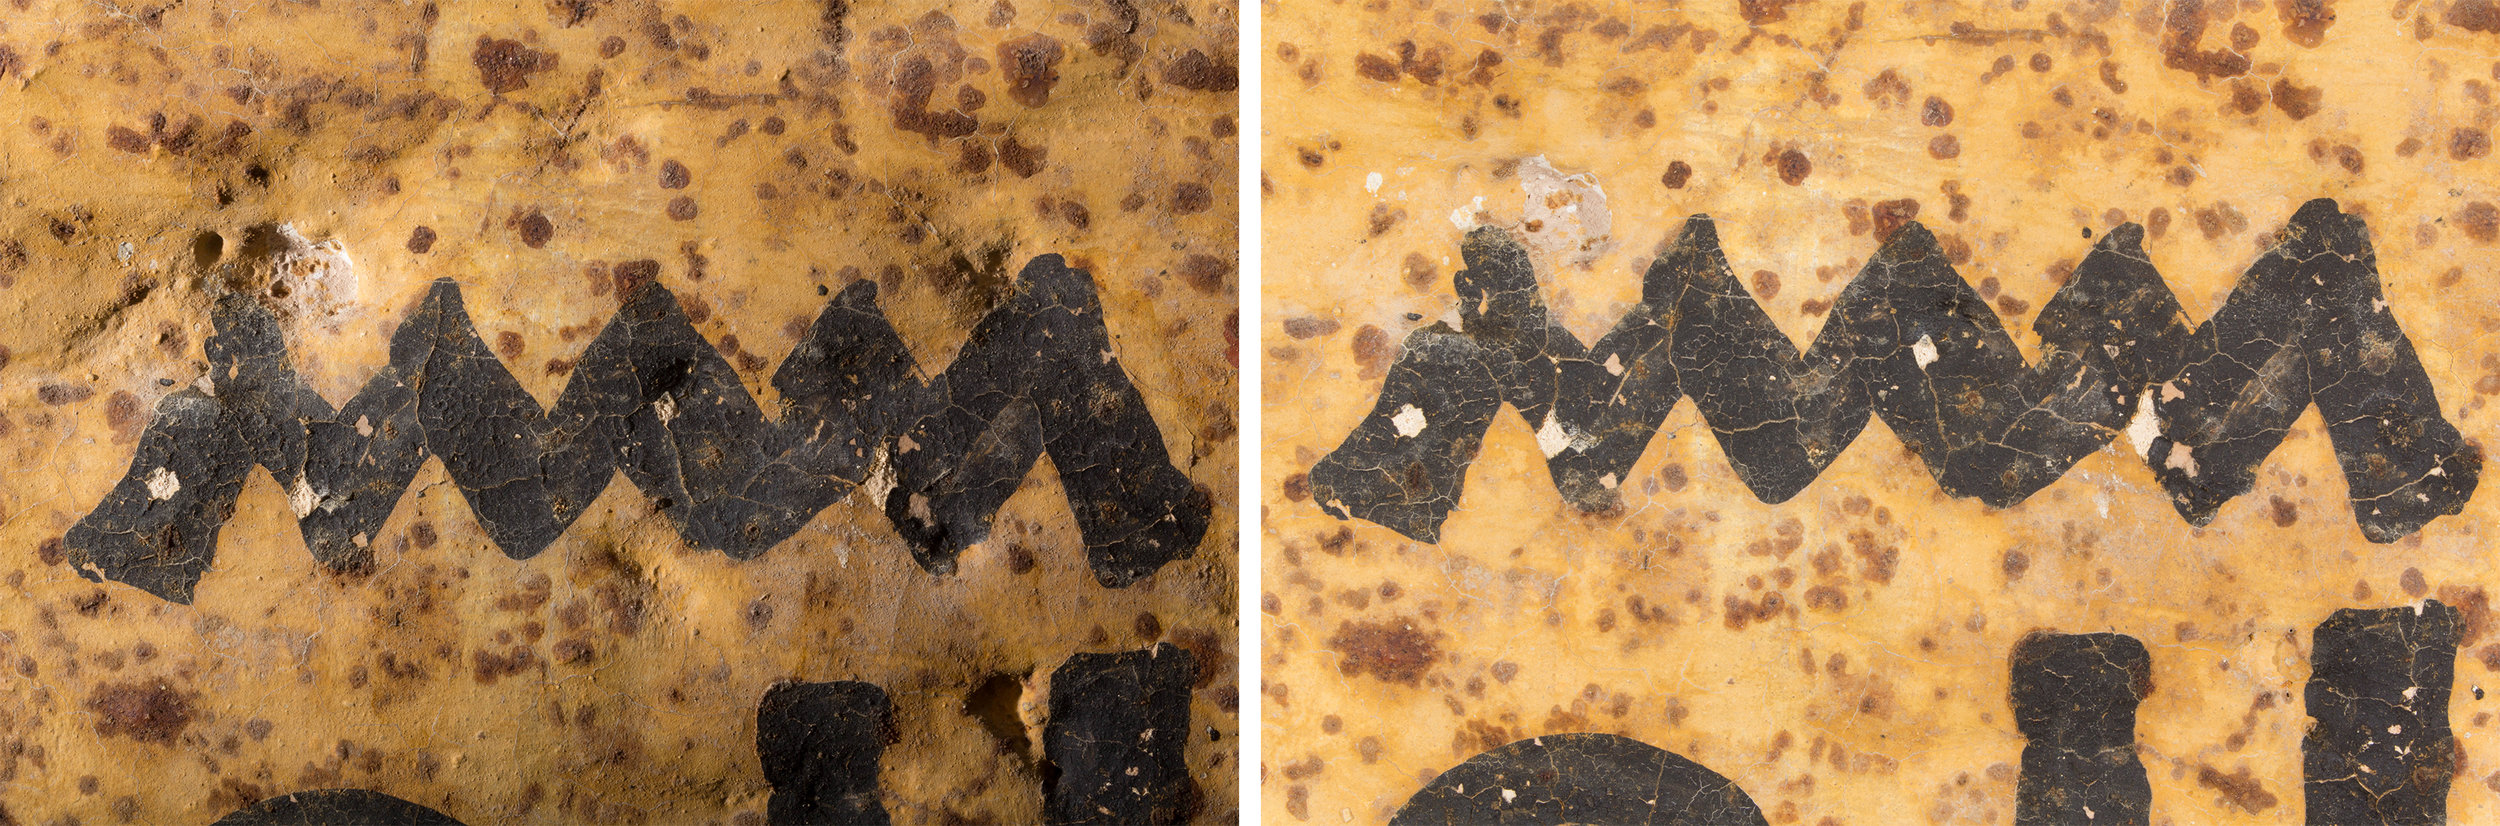  Area of flaking paint before (left) and after (right) readhesion, shown in raking light.&nbsp;  Image © J. Paul Getty Trust, 2016    